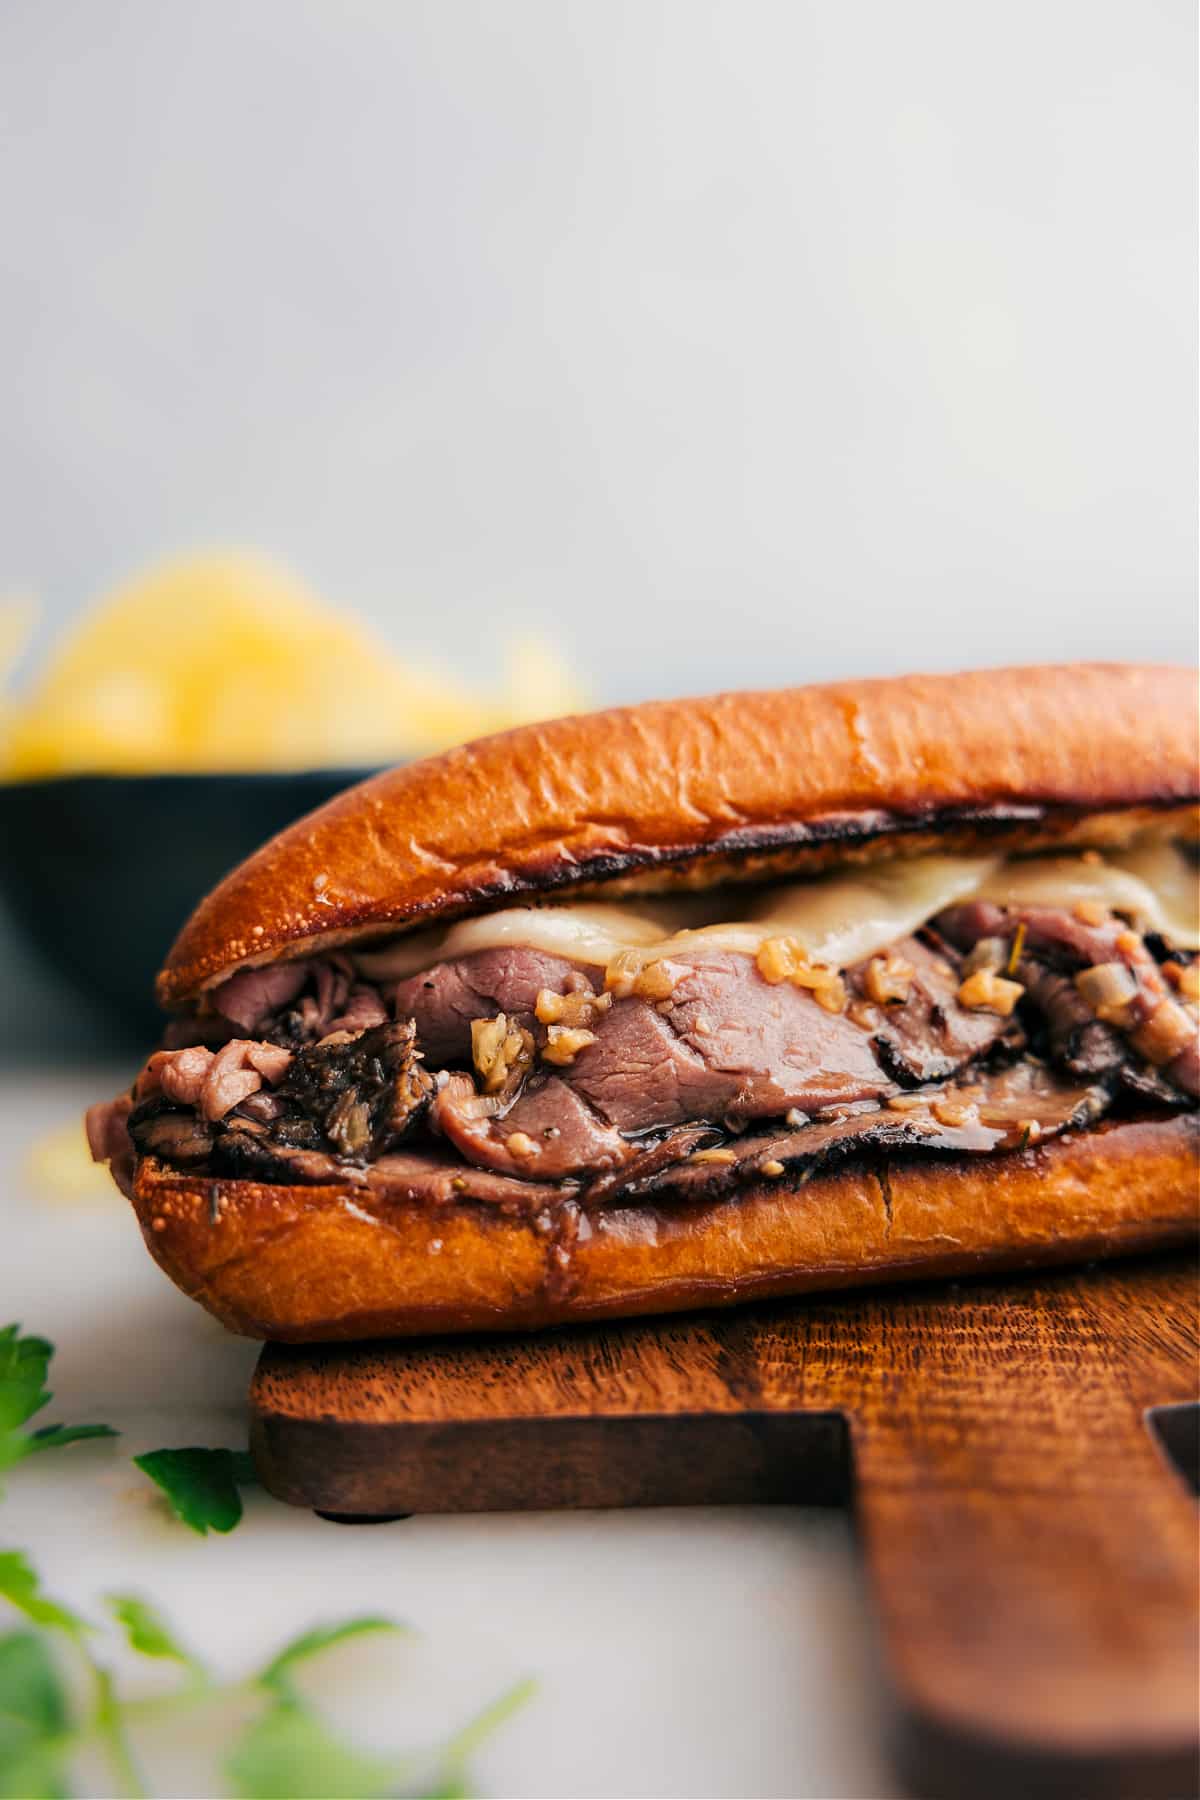 A French dip sandwich fresh out of the oven ready to be enjoyed.